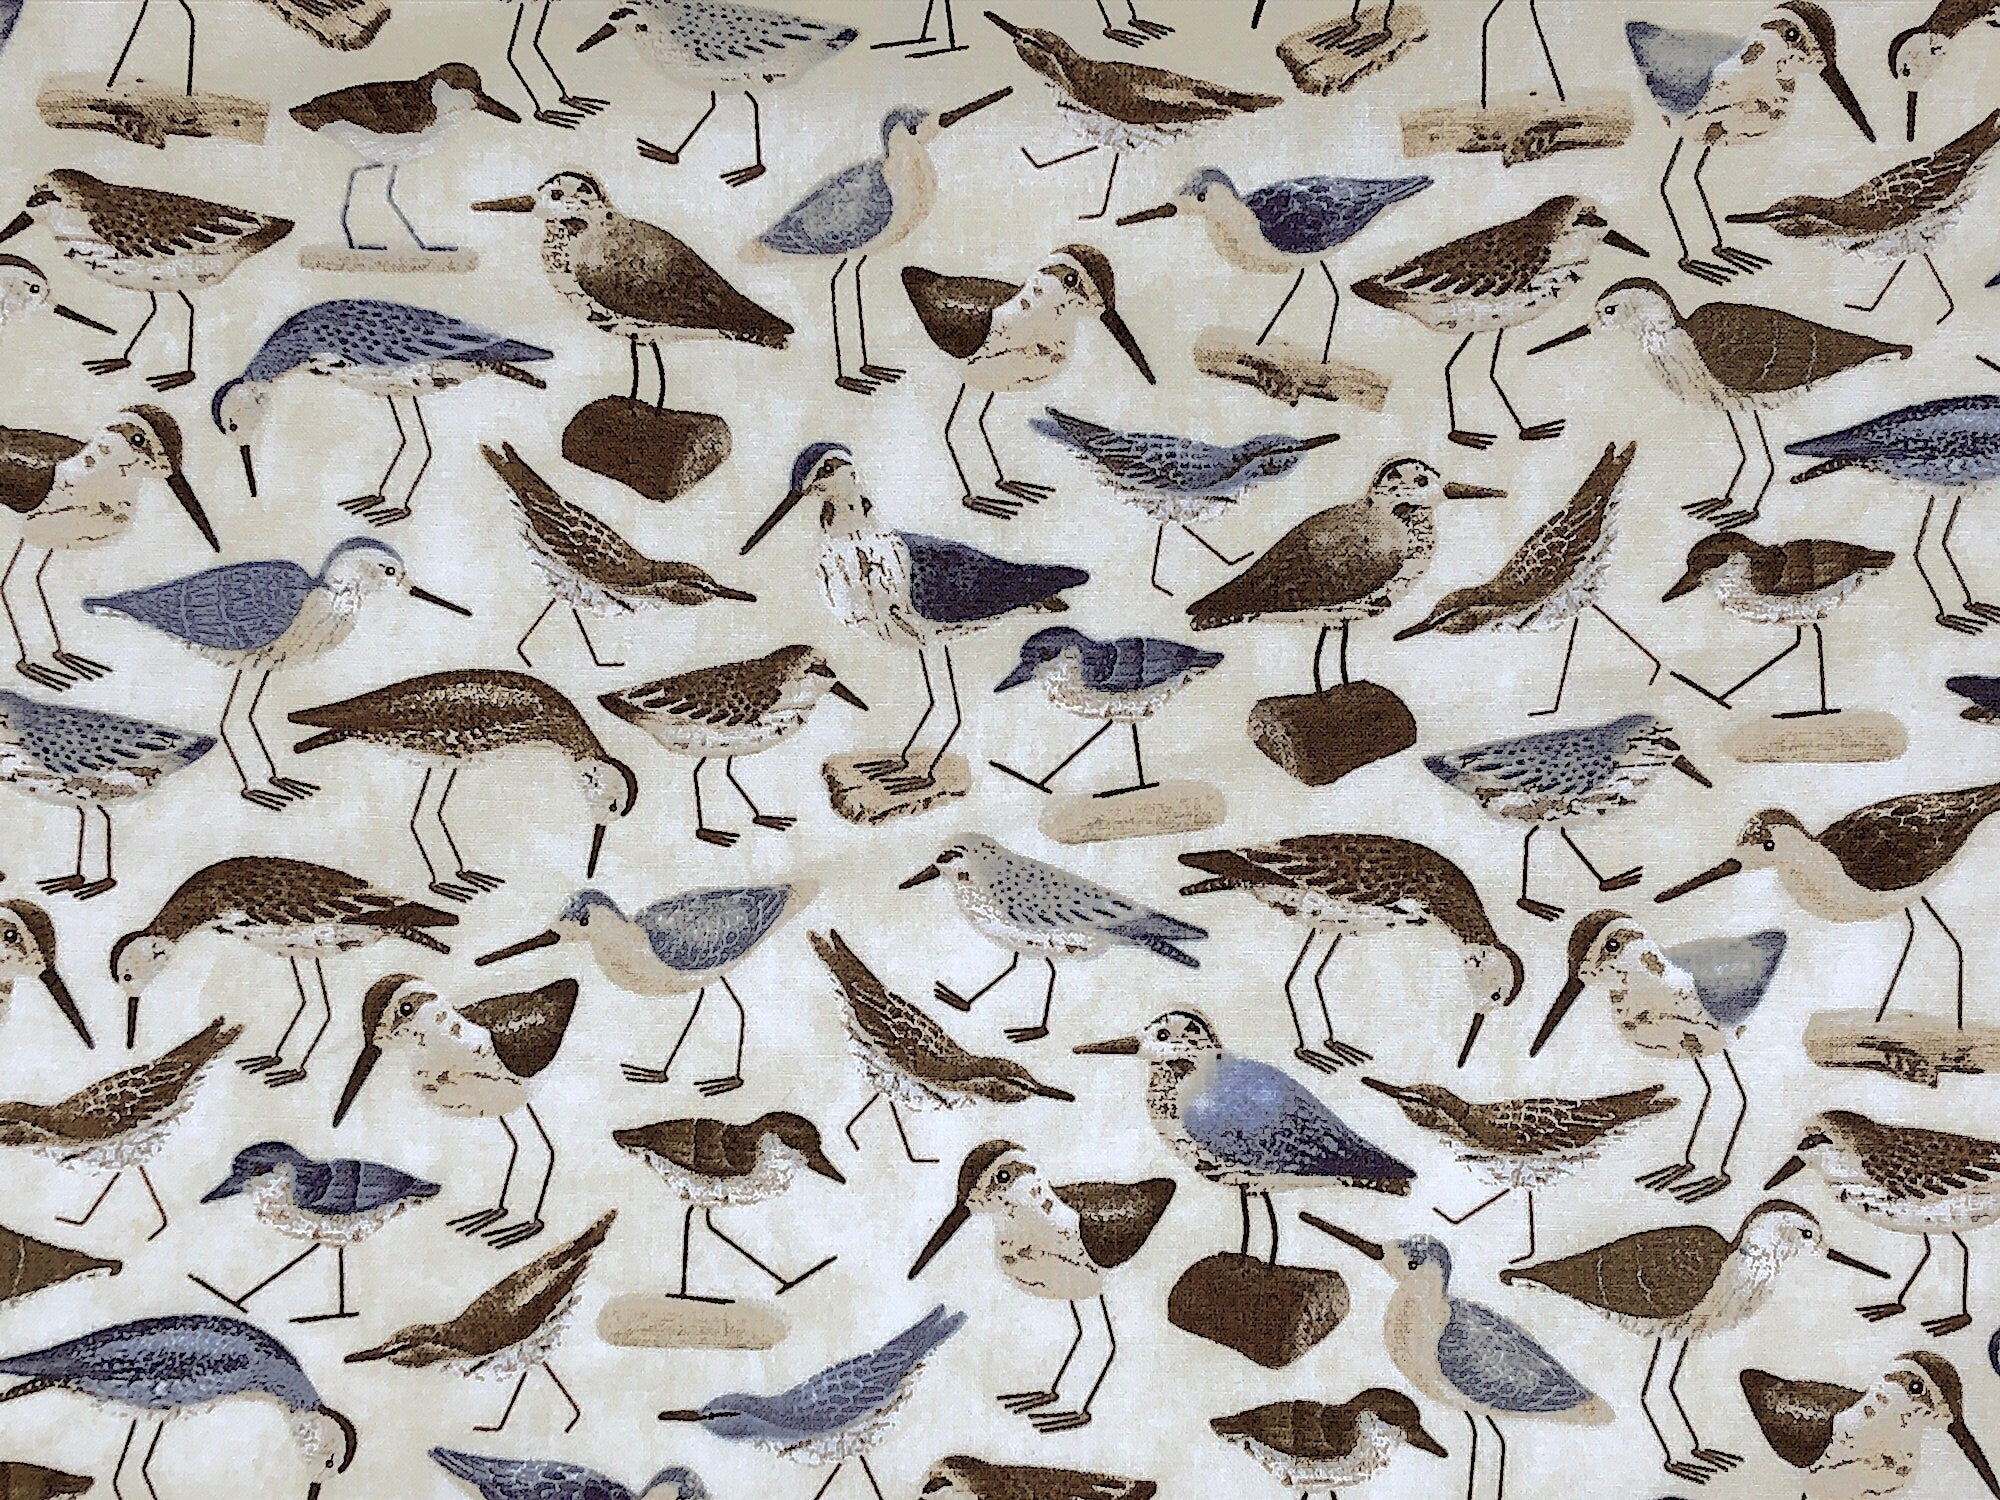 This nautical fabric is called Water Birds and is covered with birds. Some of the birds are standing on sand and others are standing on driftwood.